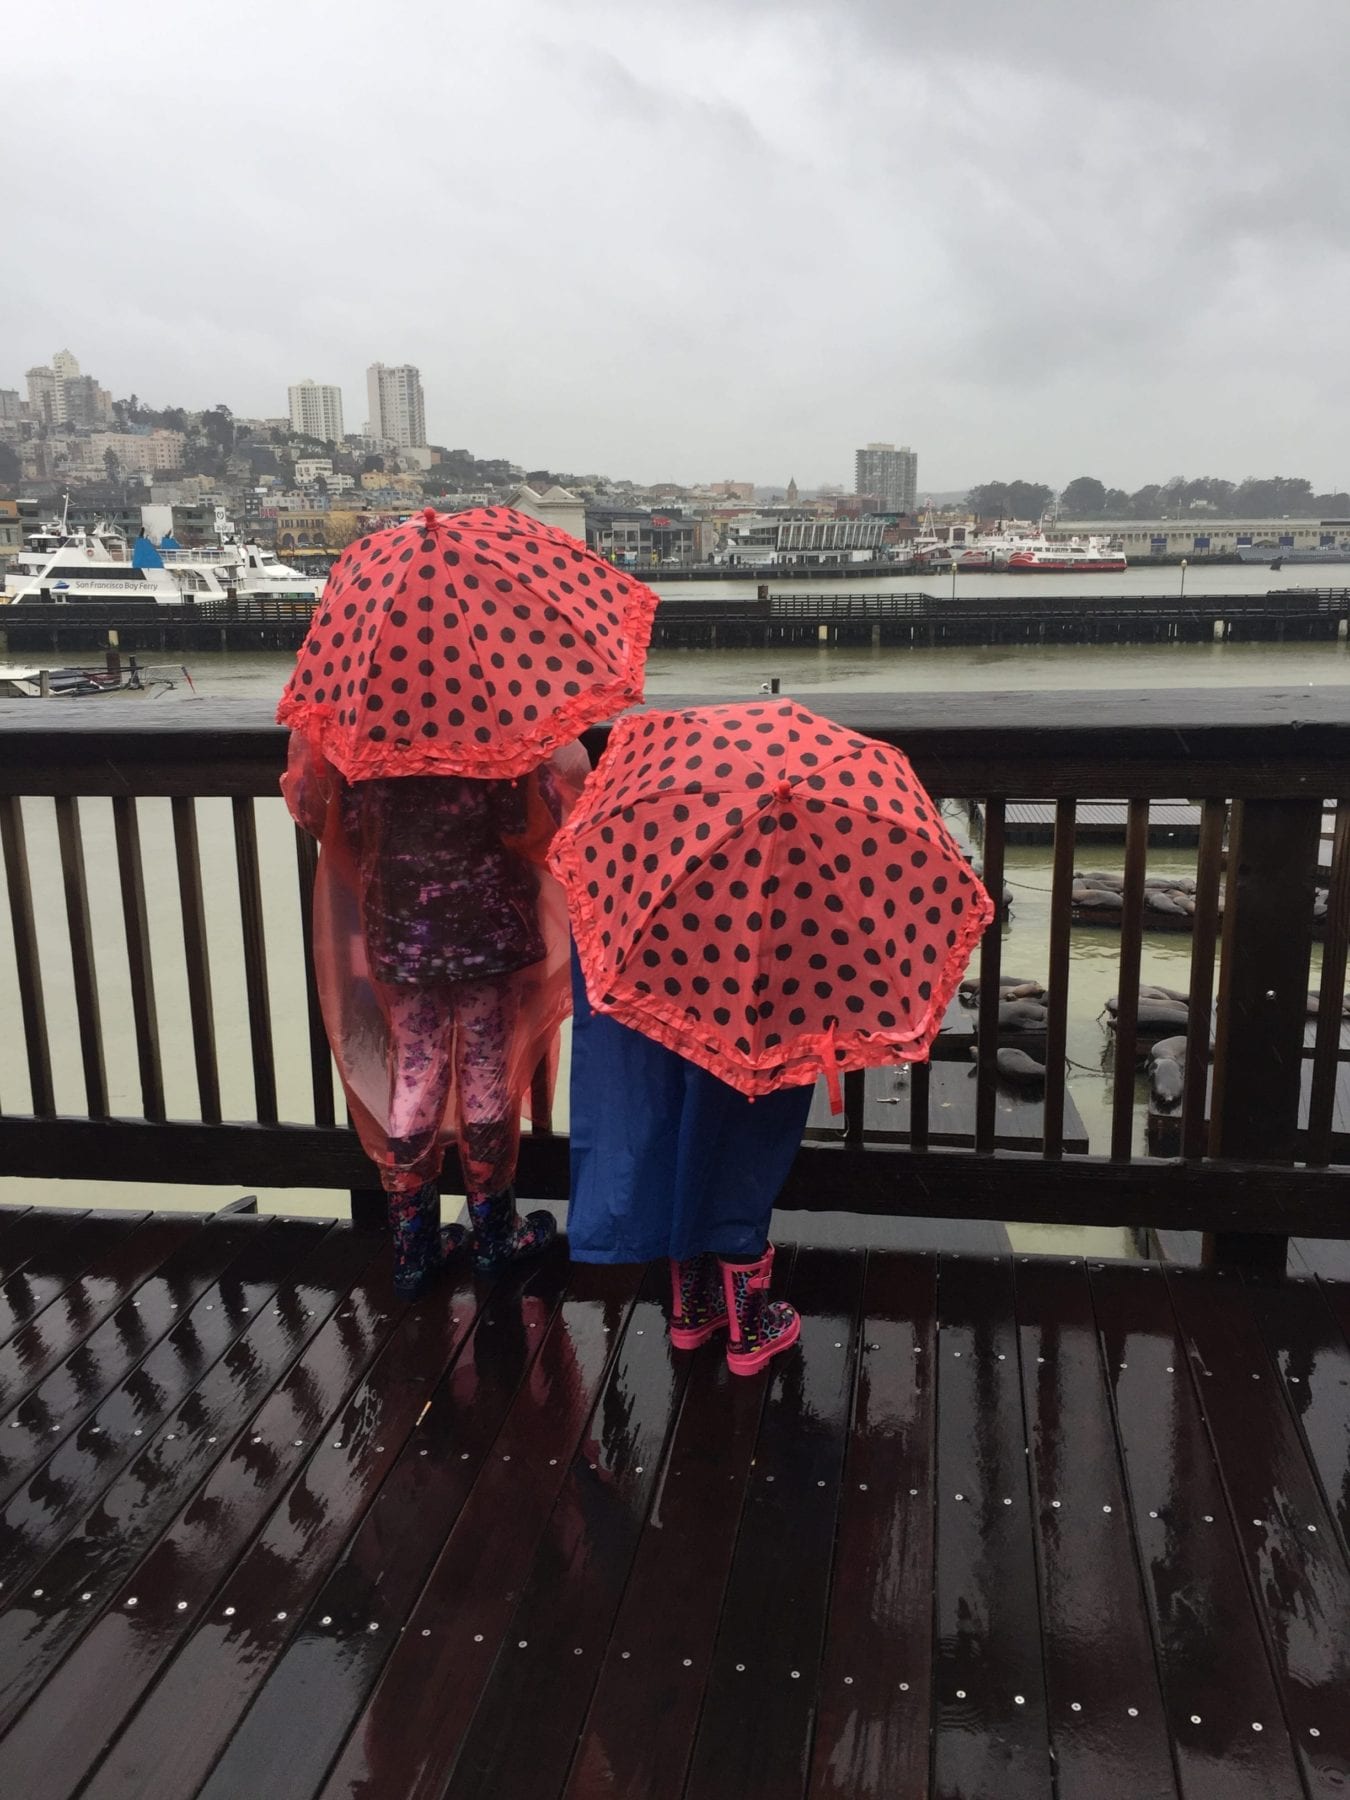 Fun things to do in San Francisco with kids